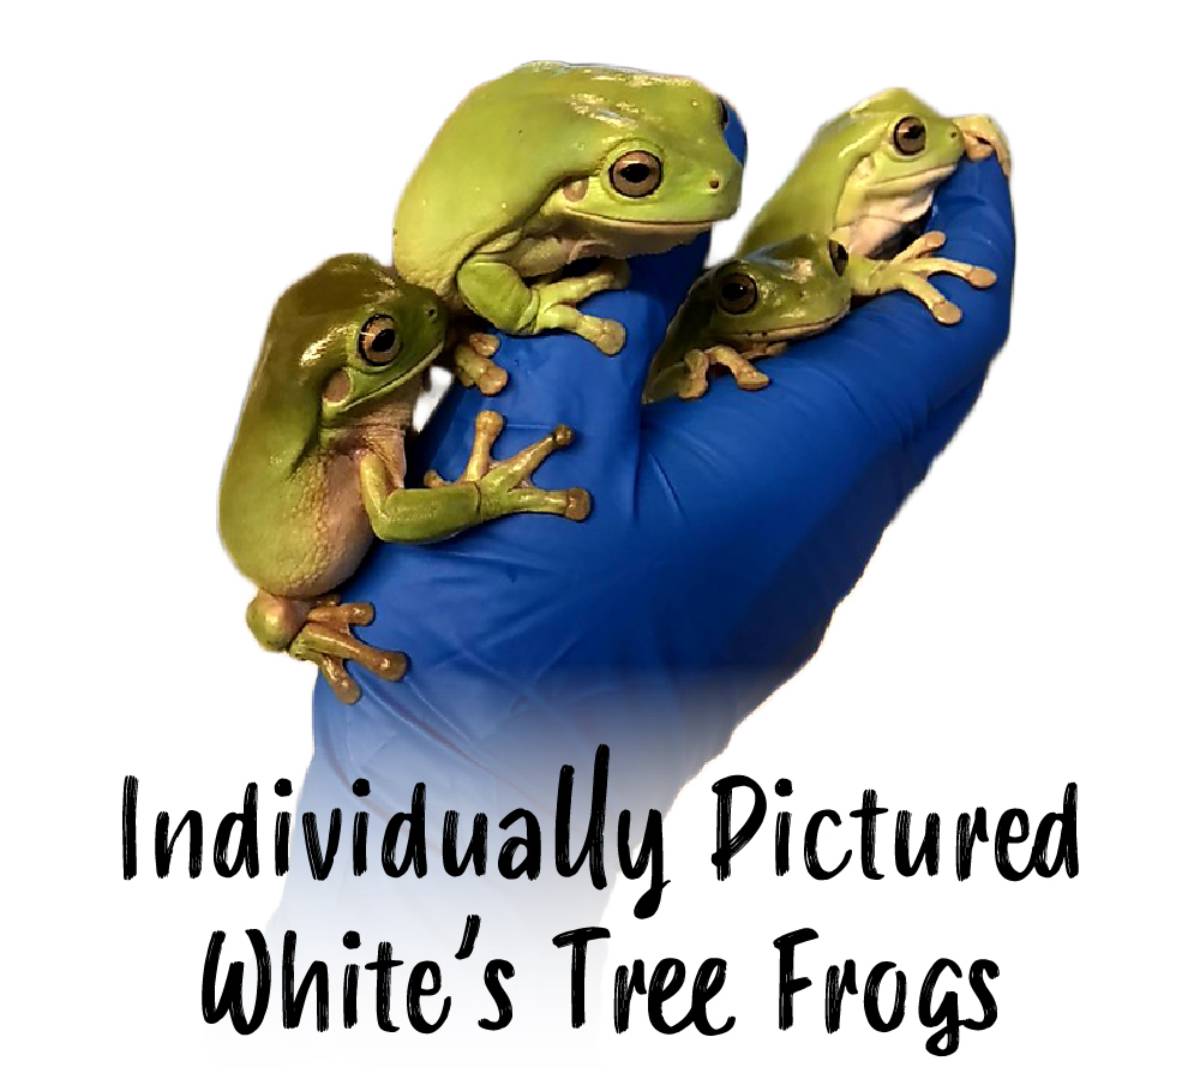 Whit's Frog